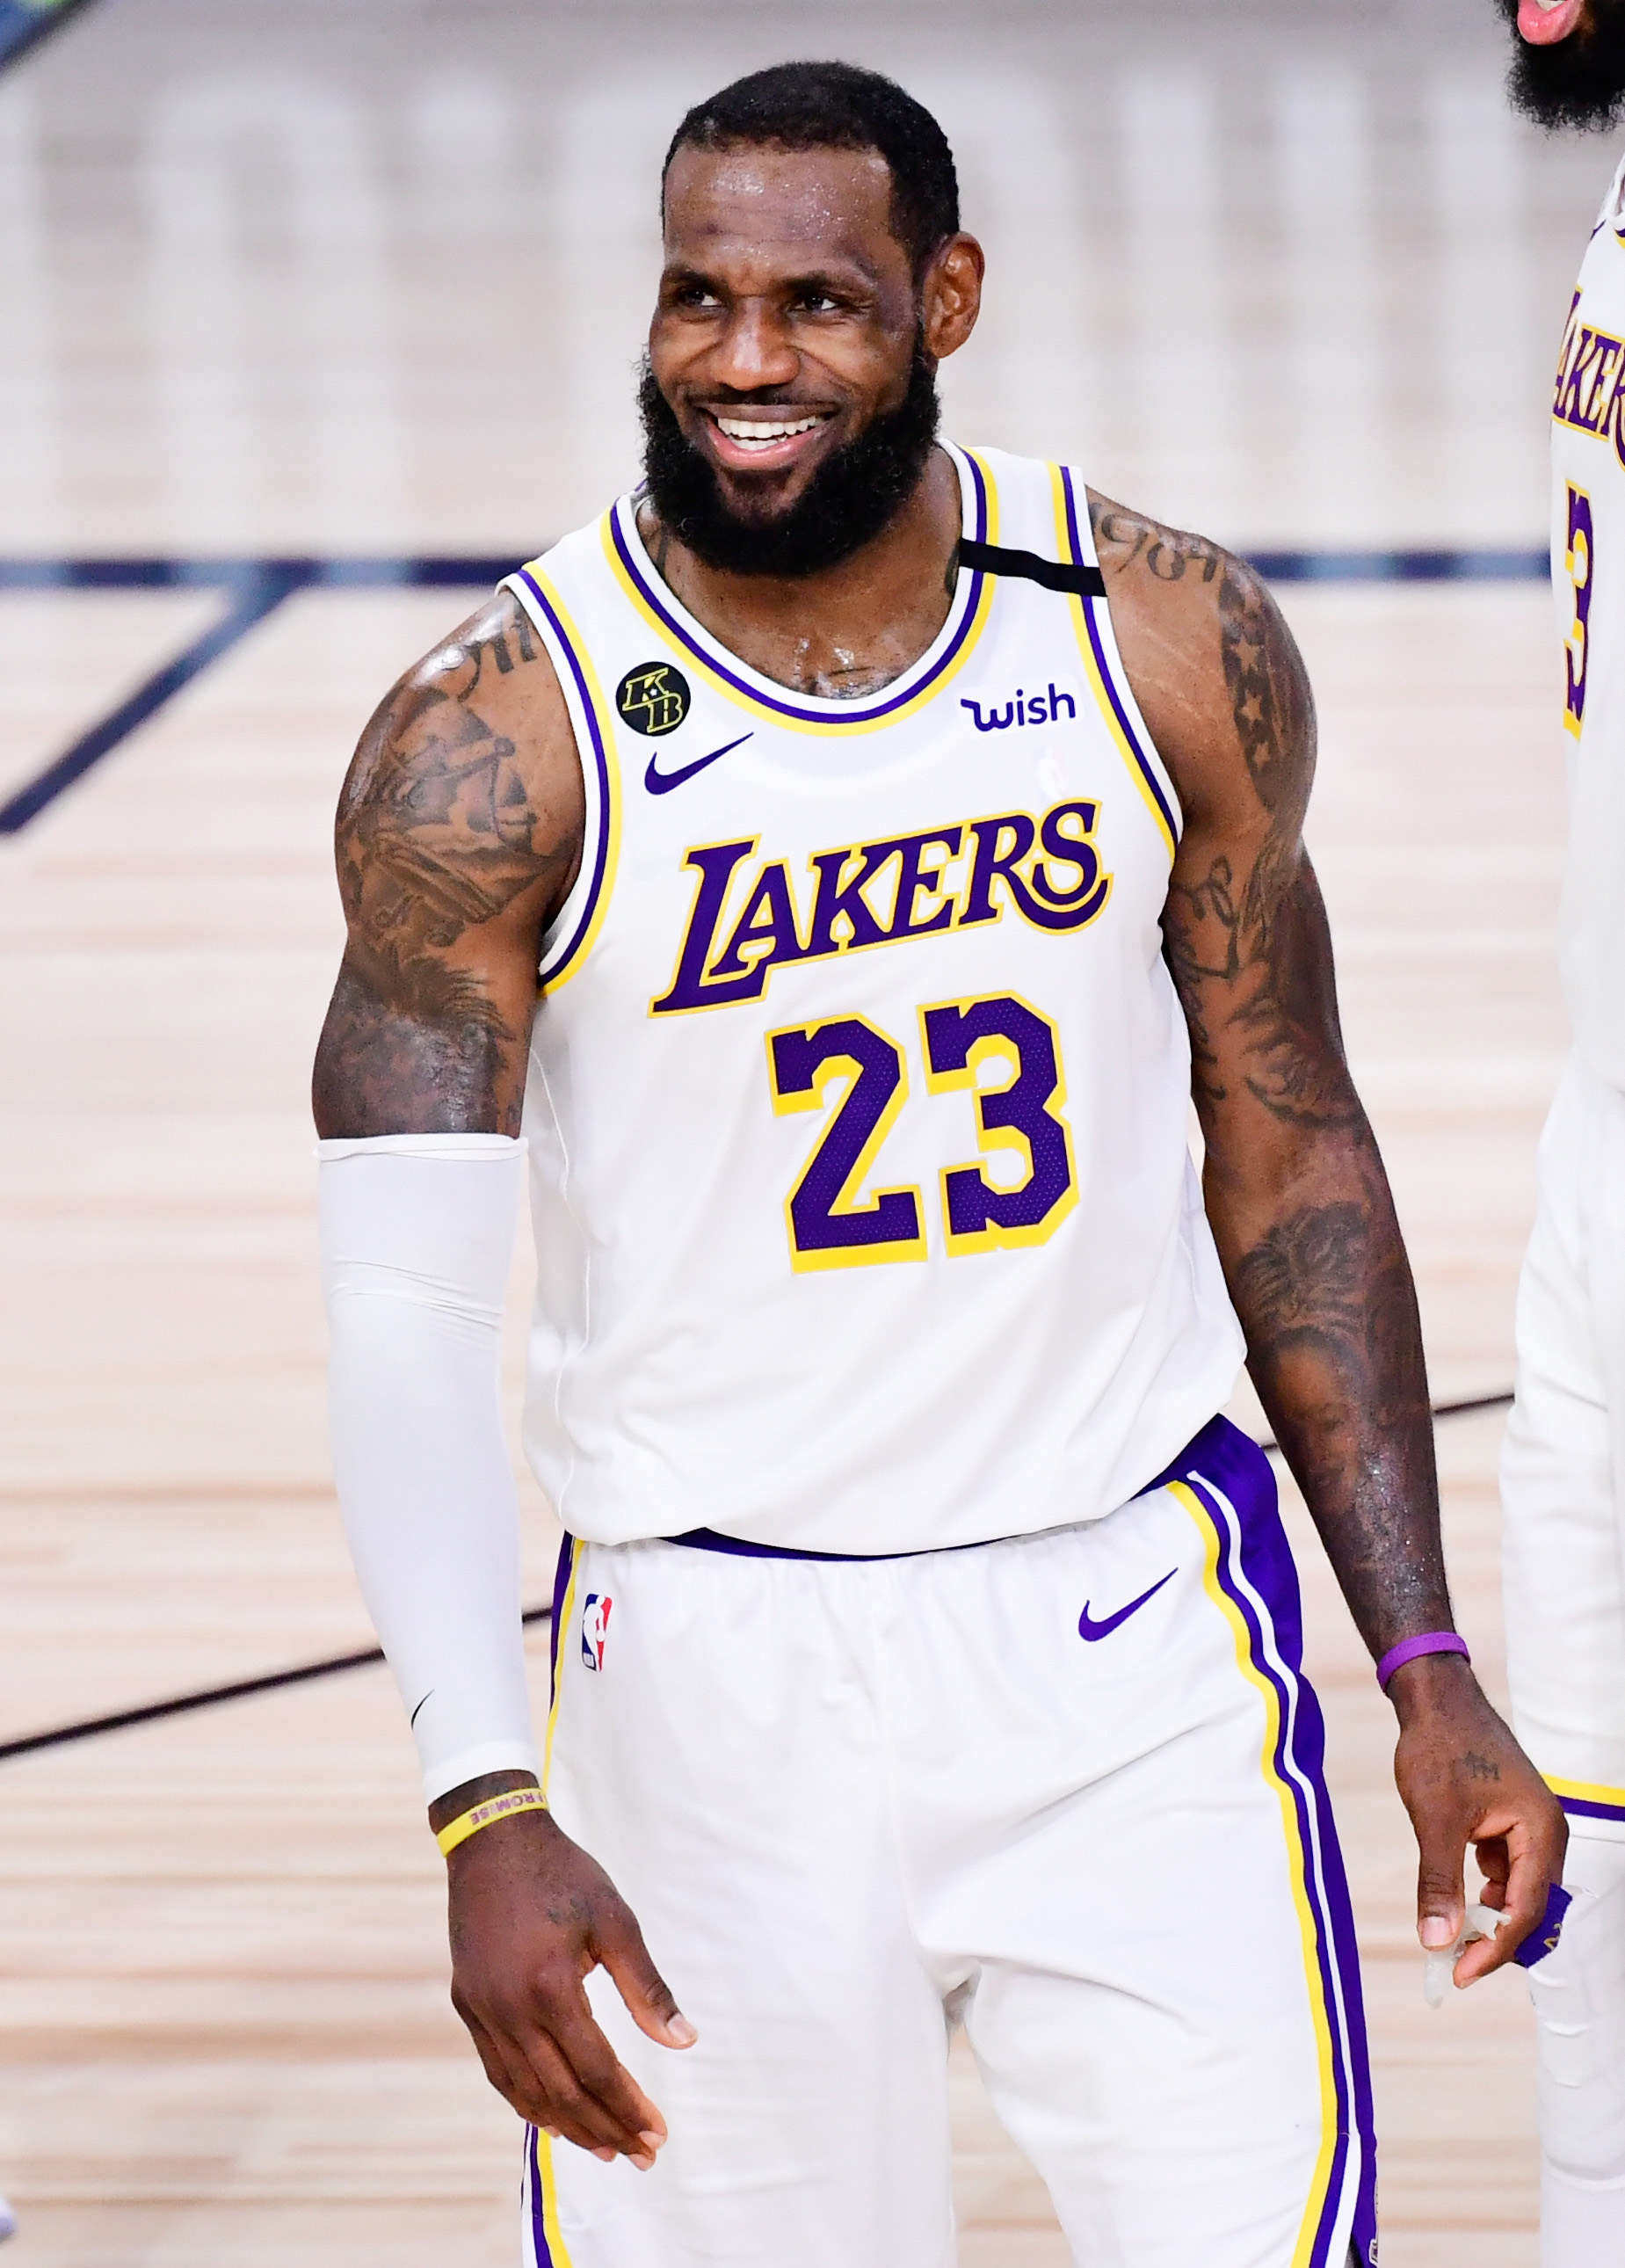 Present day Lebron James in Lakers uniform.